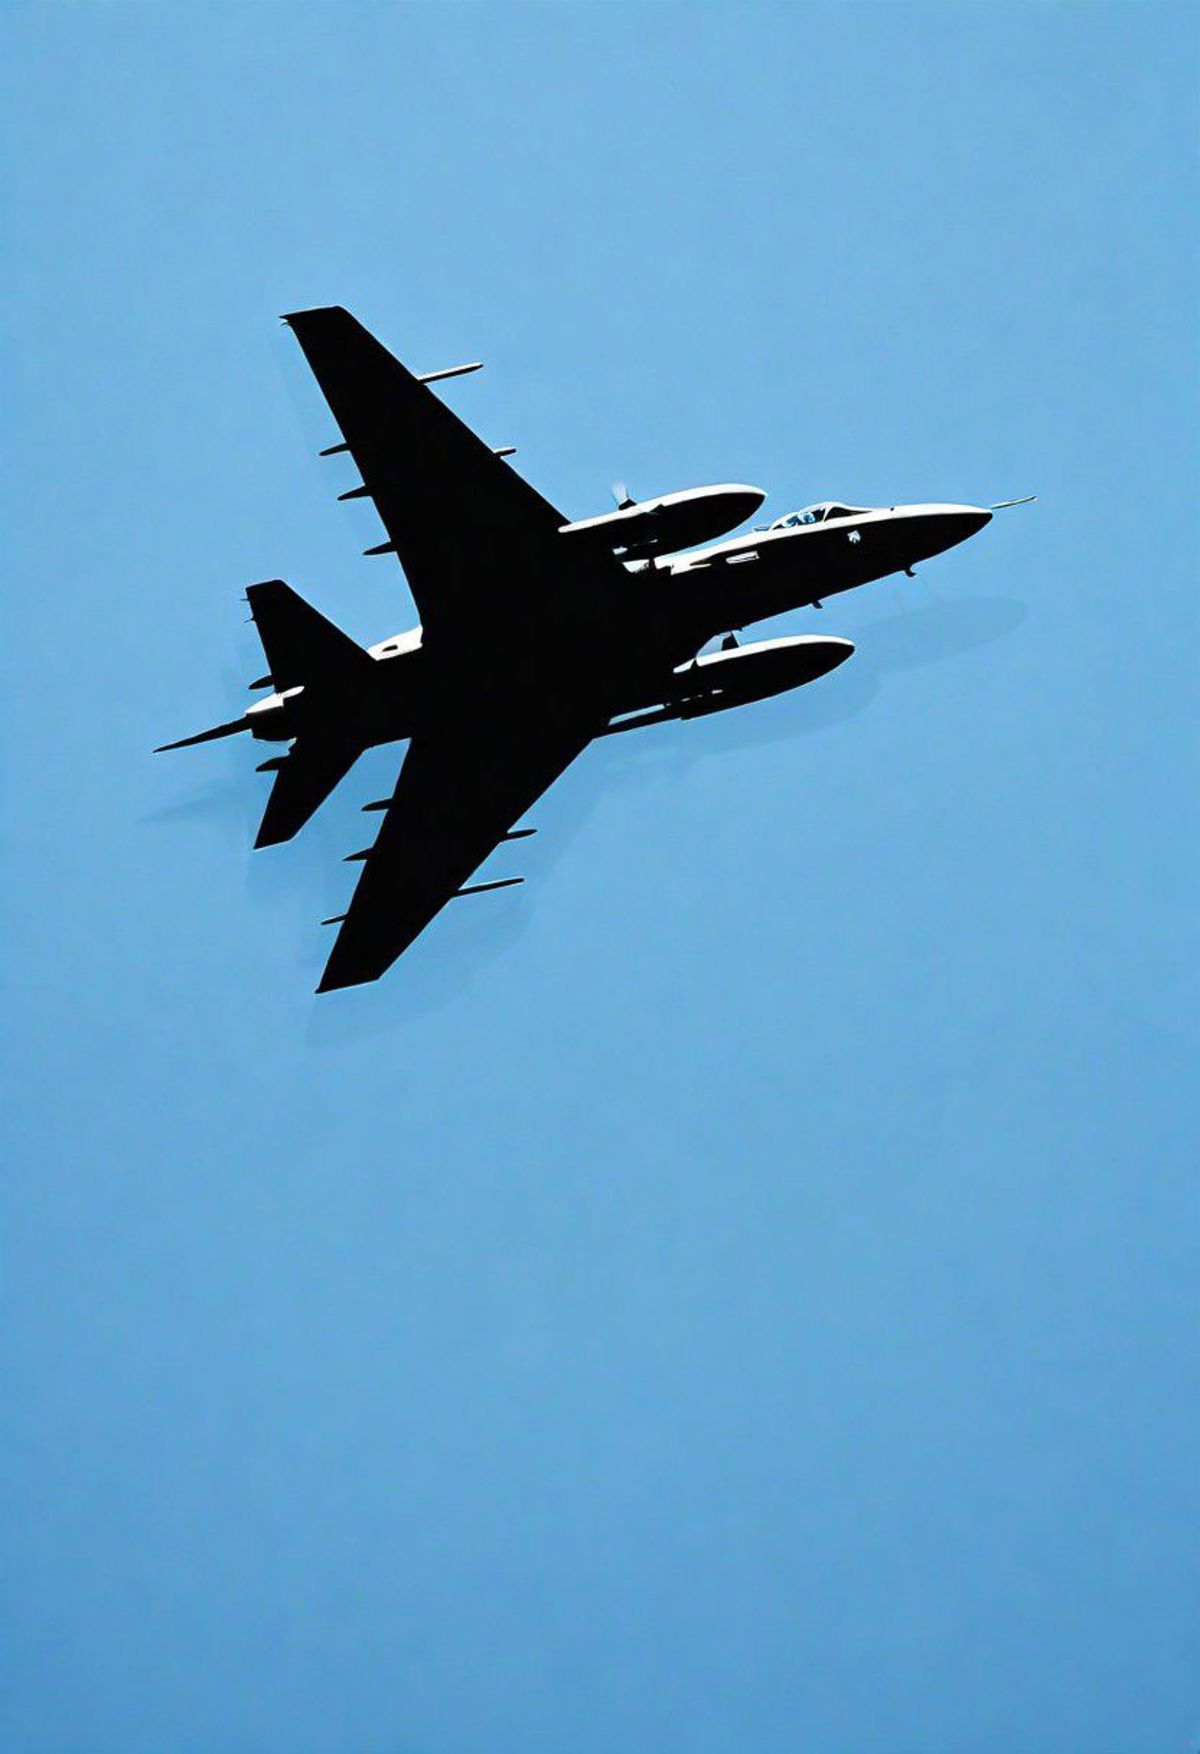 A Jet Airplane Flying High in the Sky